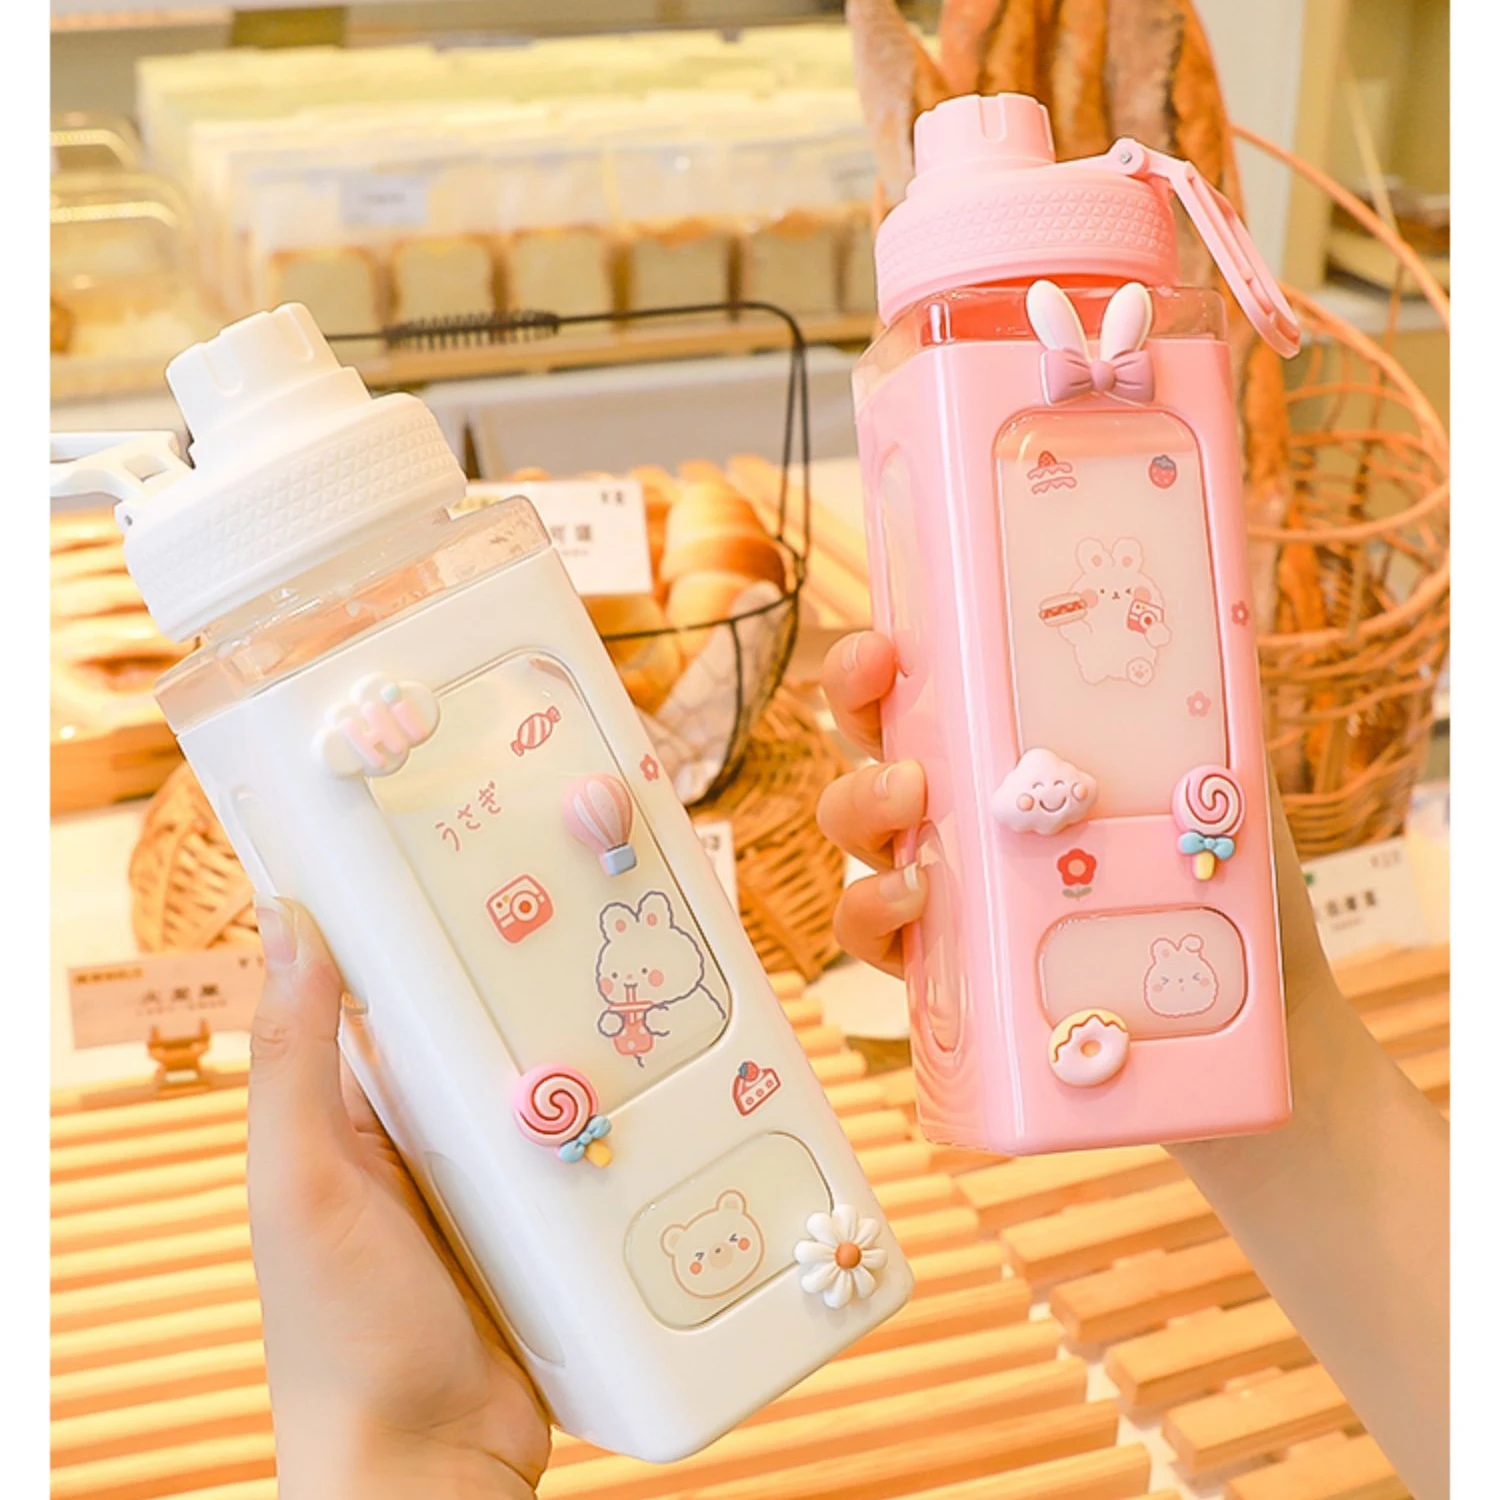 fufeisi Kawaii Water Bottle for Girls,Cute Kids Water Bottles with  Straw,700ml Portable LeakProof Bo…See more fufeisi Kawaii Water Bottle for